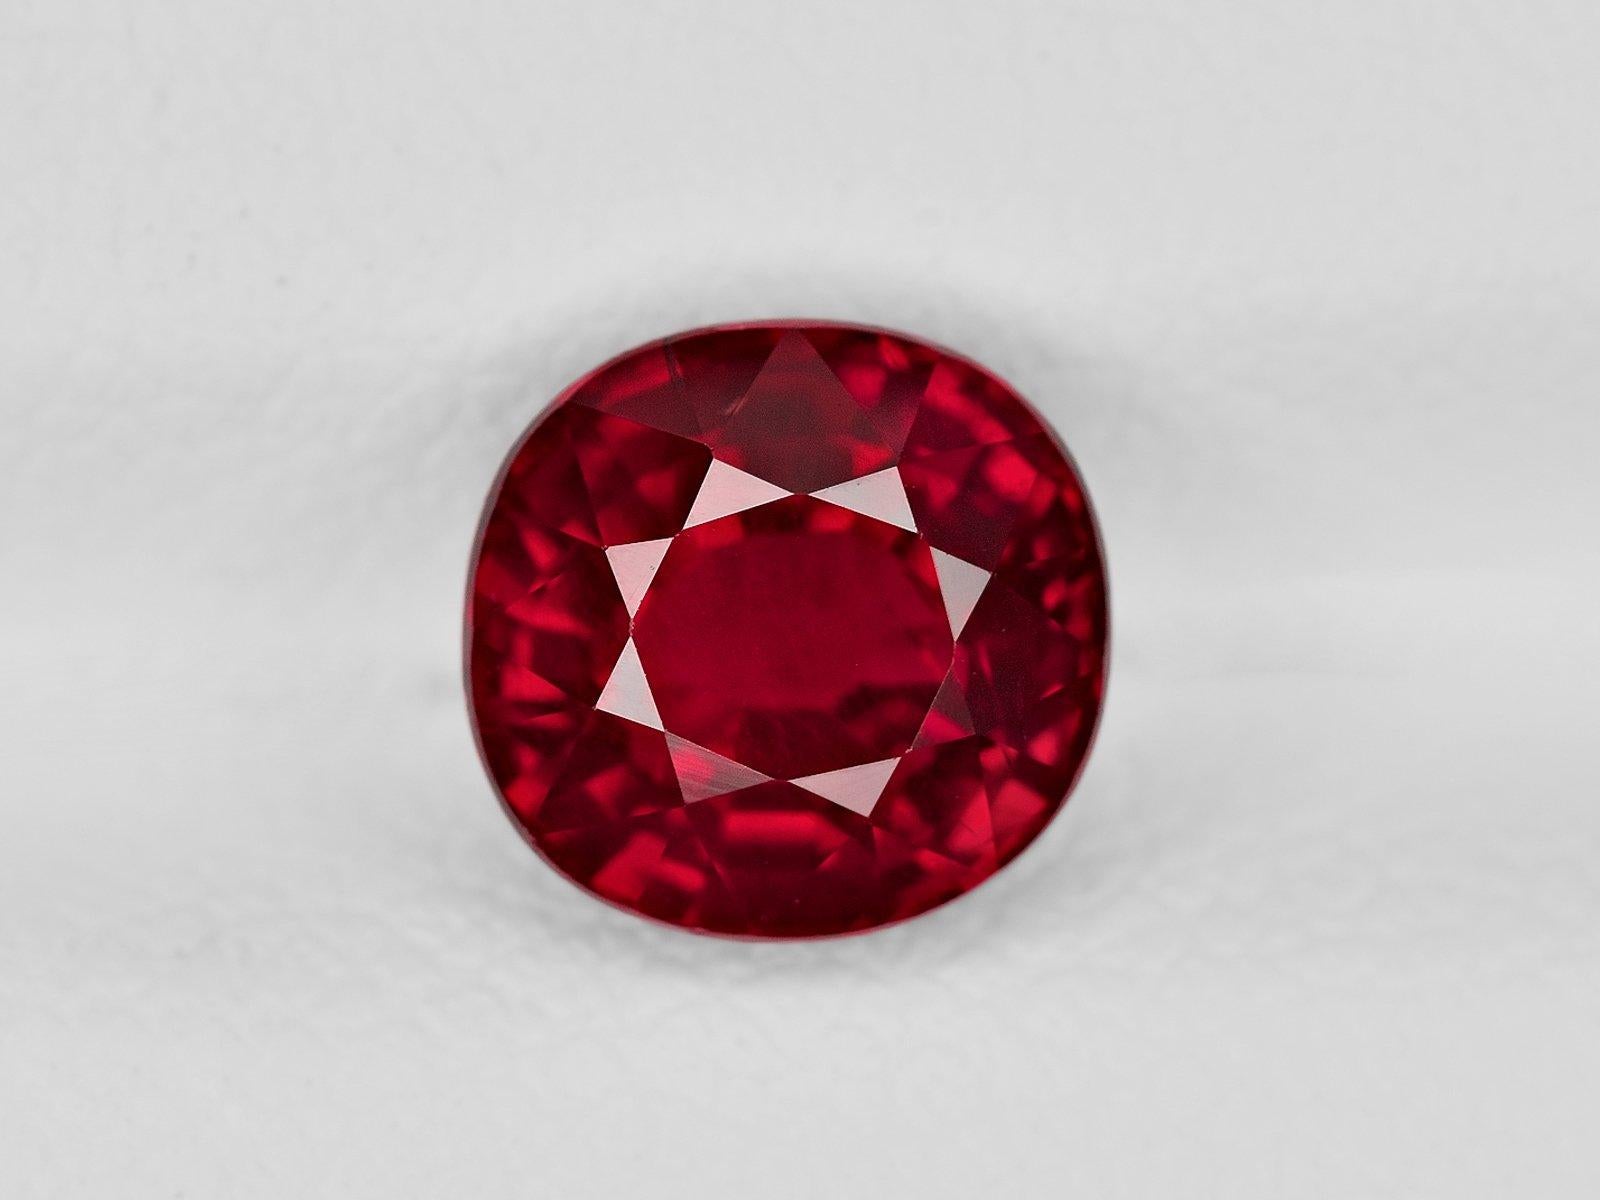 An amazing no heat ruby ring mined in Myanmar, BURMA with two natural trillion cut diamonds at each side set in 18 carats white gold.

Rubies are the king of gems



